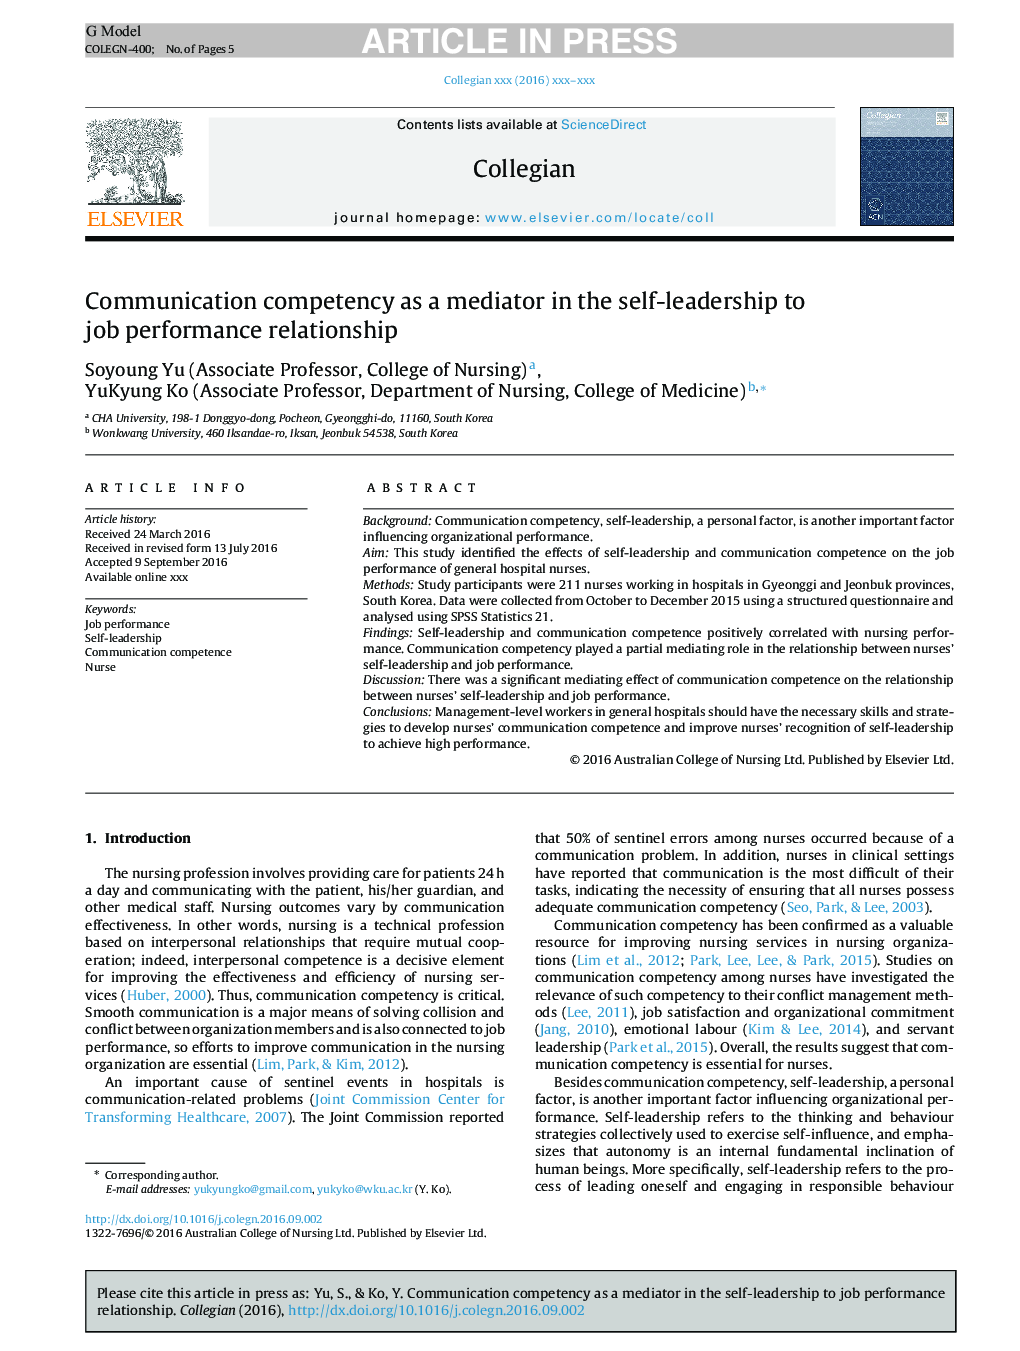 Communication competency as a mediator in the self-leadership to job performance relationship